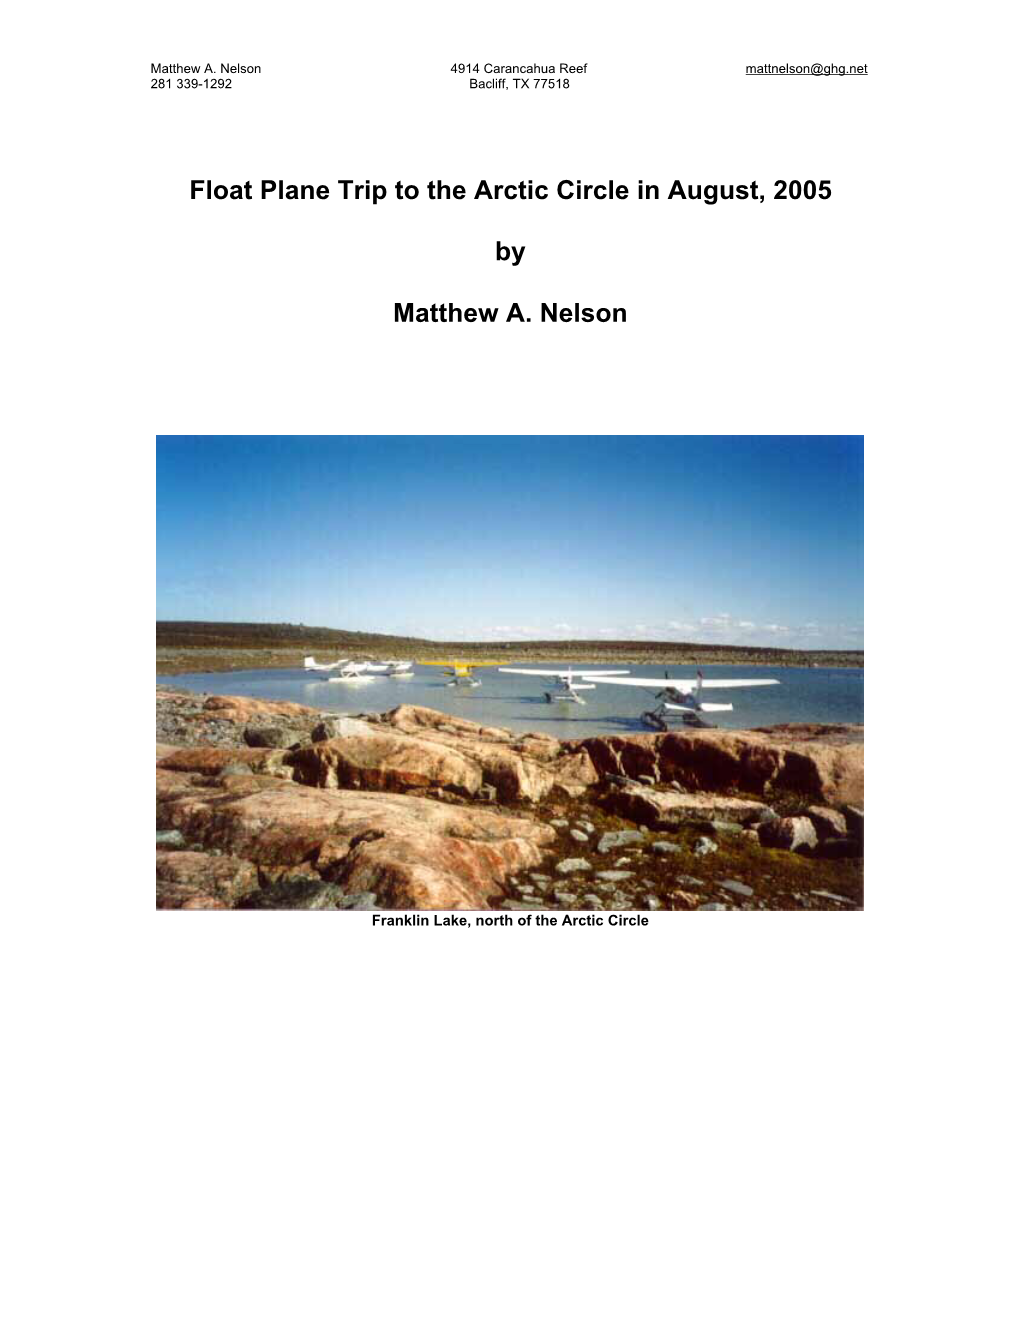 Float Plane Trip to the Arctic Circle in August, 2005 by Matthew A. Nelson